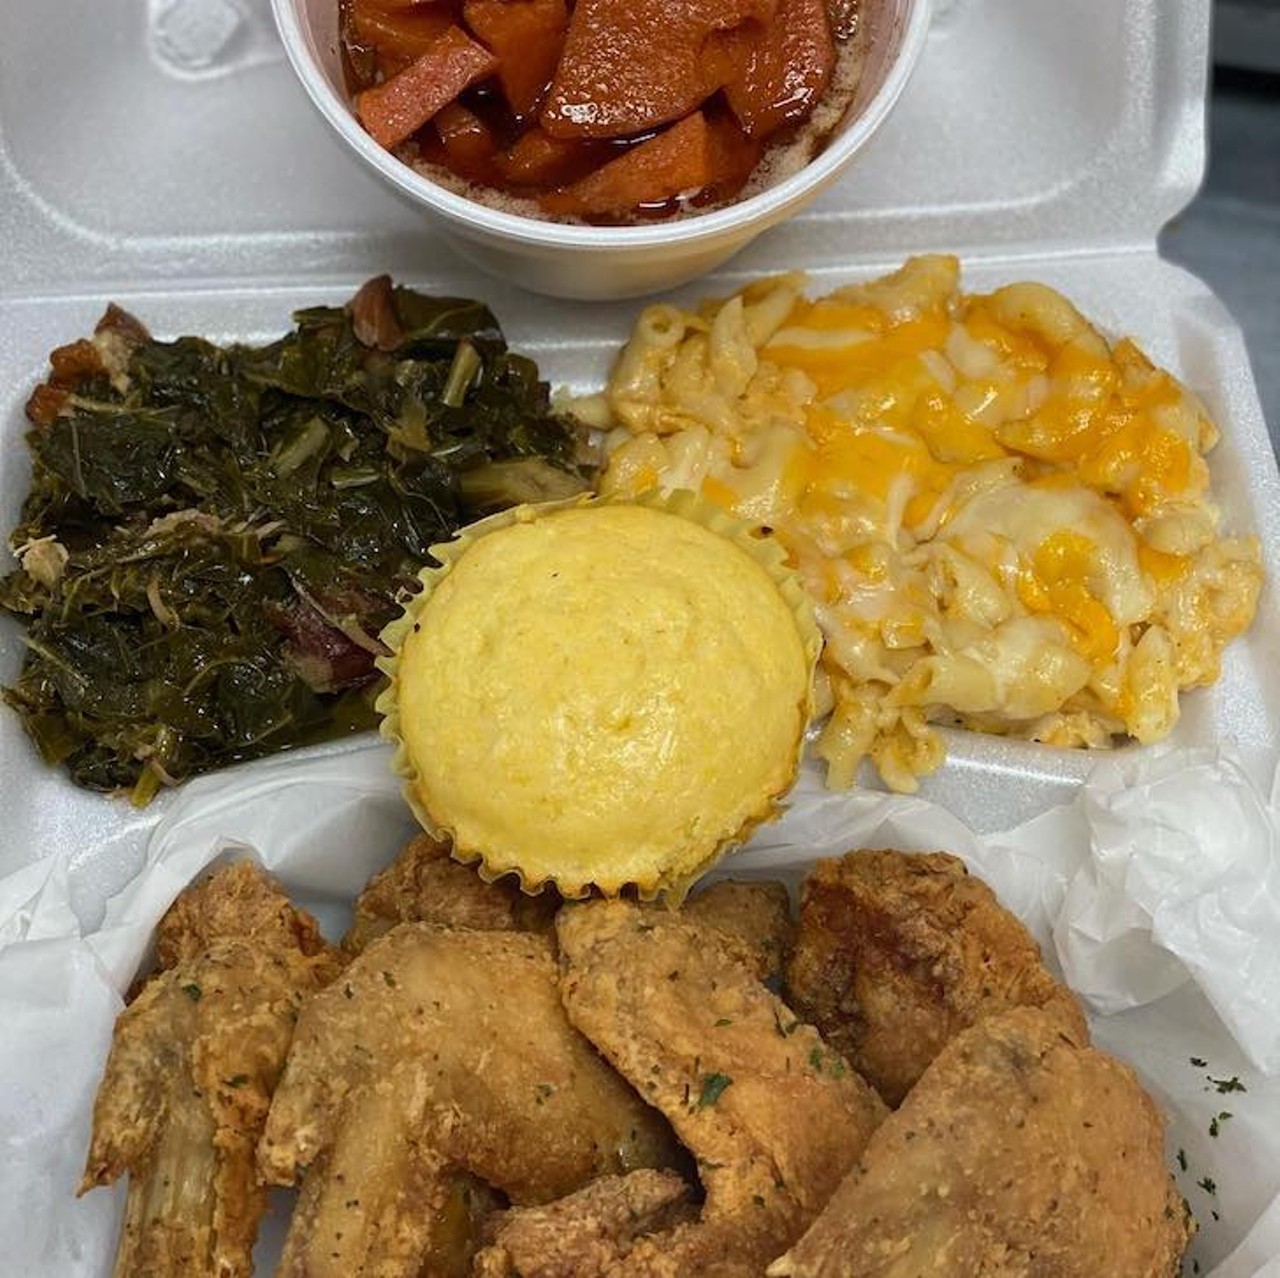 Lillie Bell&#146;s
25030 Southfield Rd., Southfield; 248-595-9070
&#147;We had two rib tip dinners with greens and baked beans, a large order of mac and cheese, a gimme all you got spud, and strawberry banana pudding.
I was taken back to my childhood. It was so unbelievably good. All of it.
Thank you so so so much for the amazing meal.&#148; - Katie H.
Photo via  Lillie Bell&#146;s/Facebook